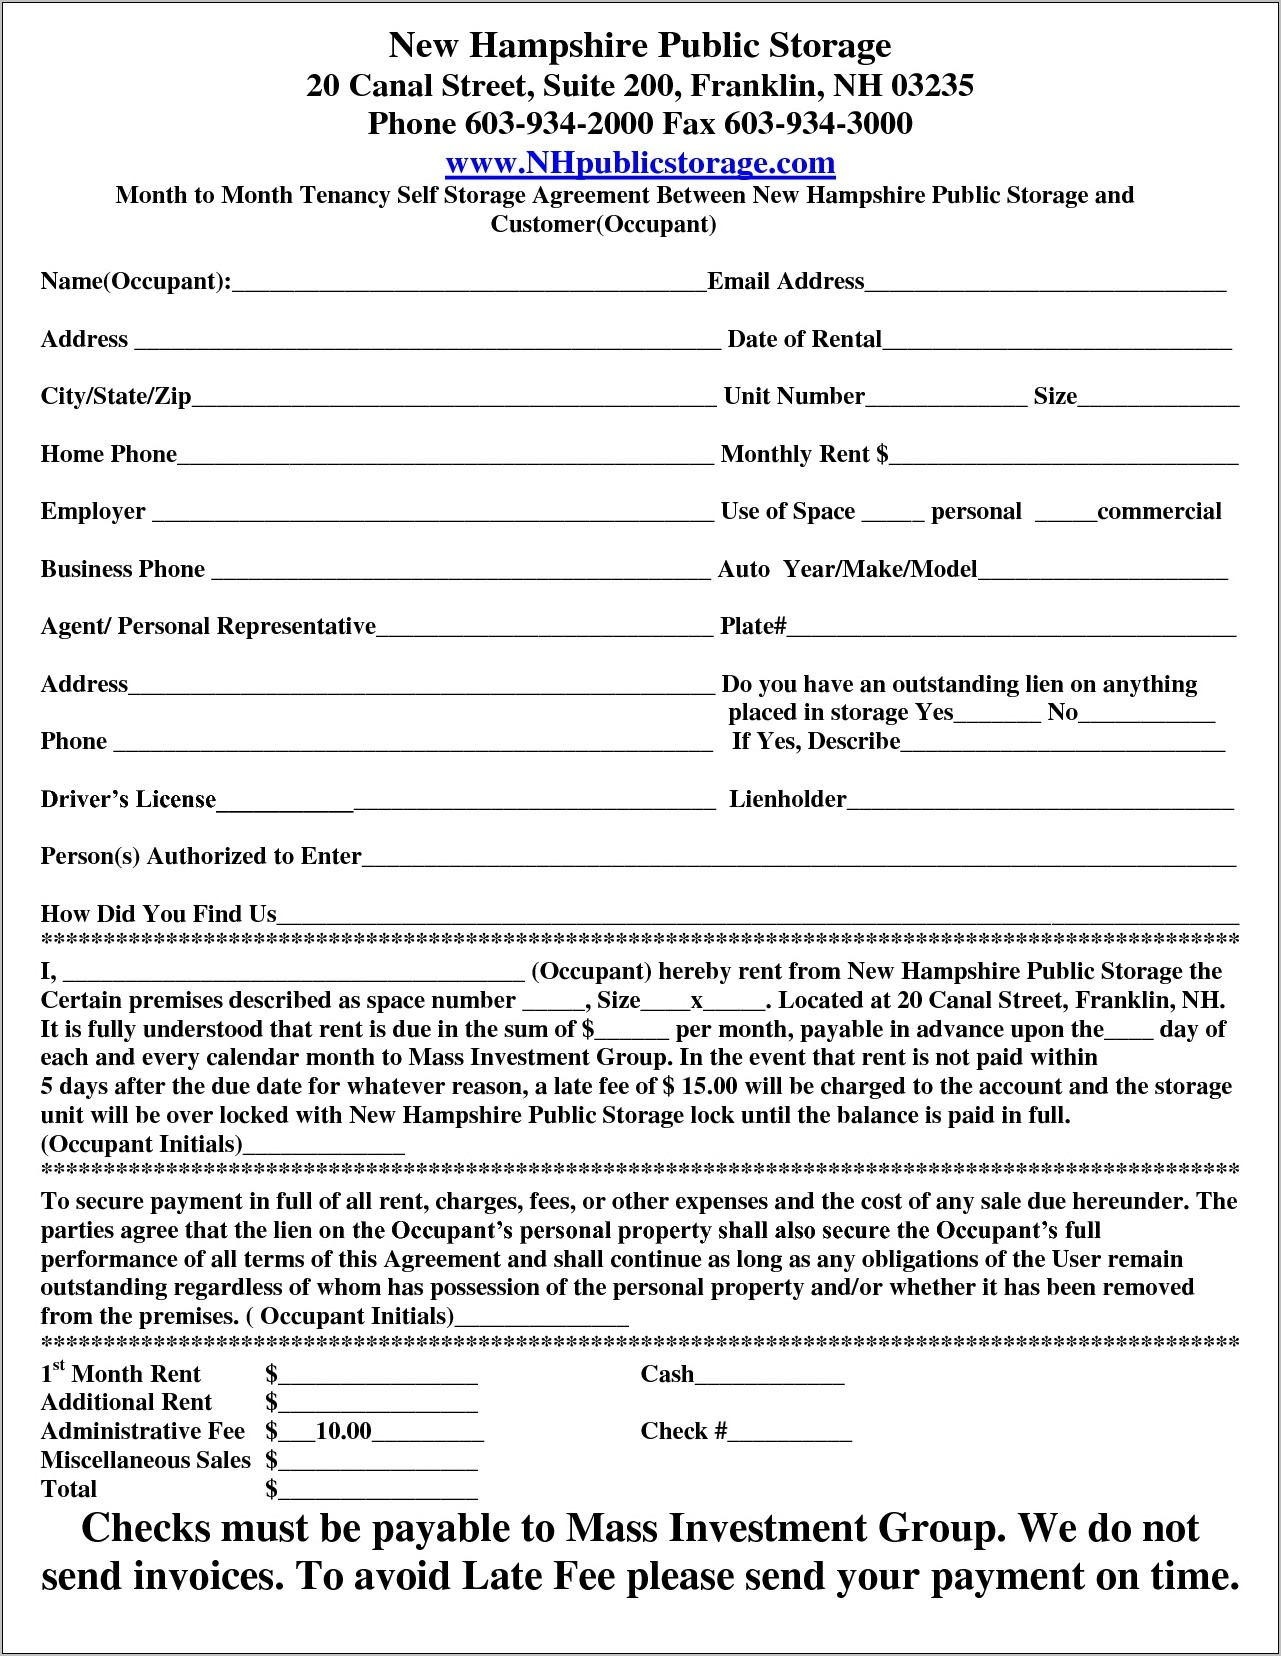 Used Car Selling Agreement Form